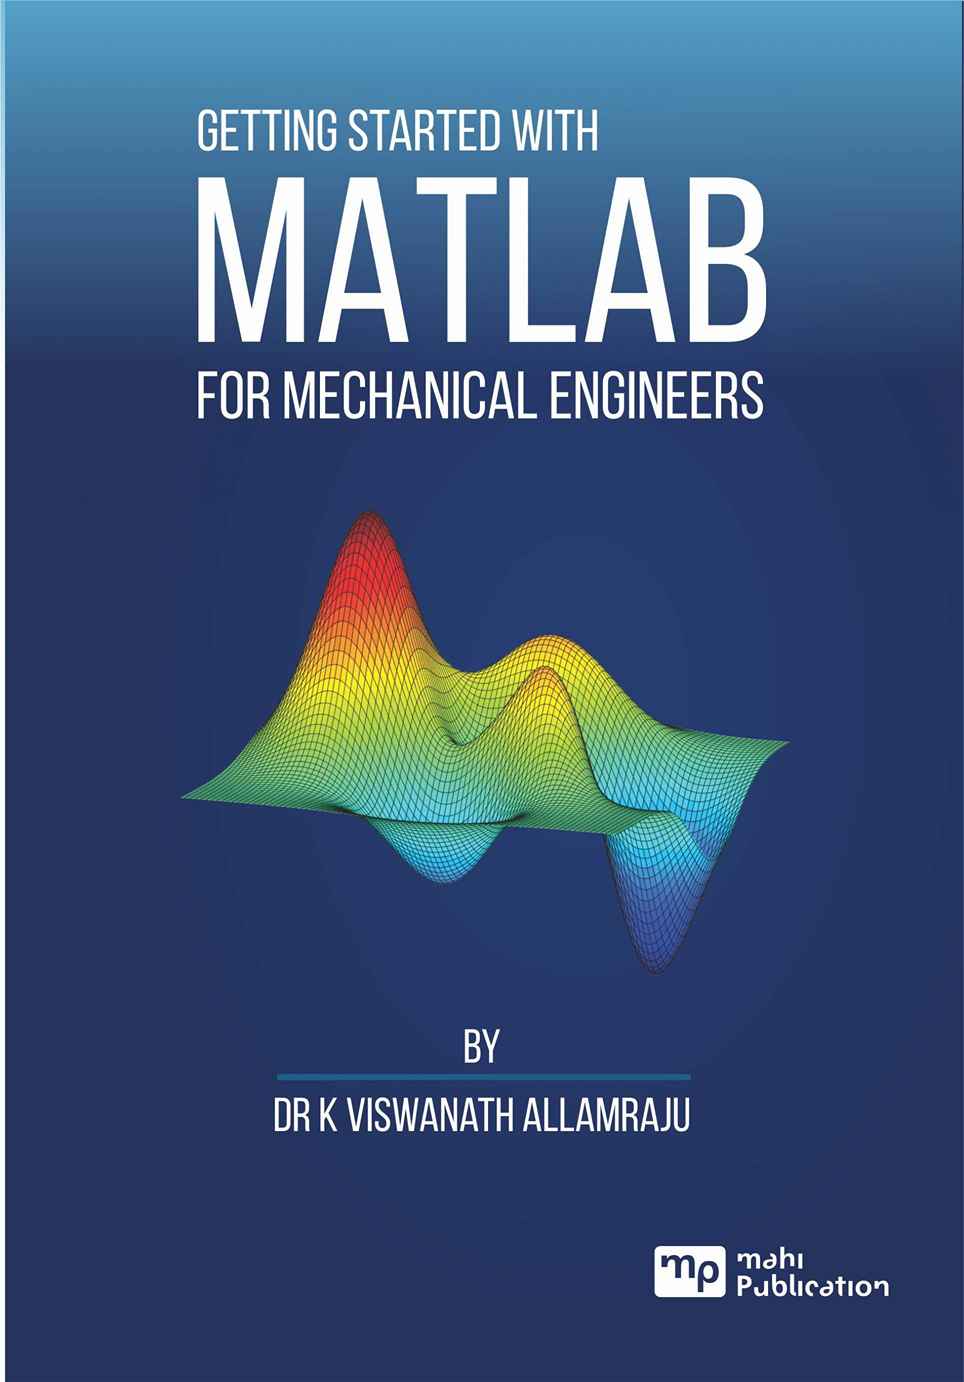 Getting started with MATLAB for Mechanical Engineers